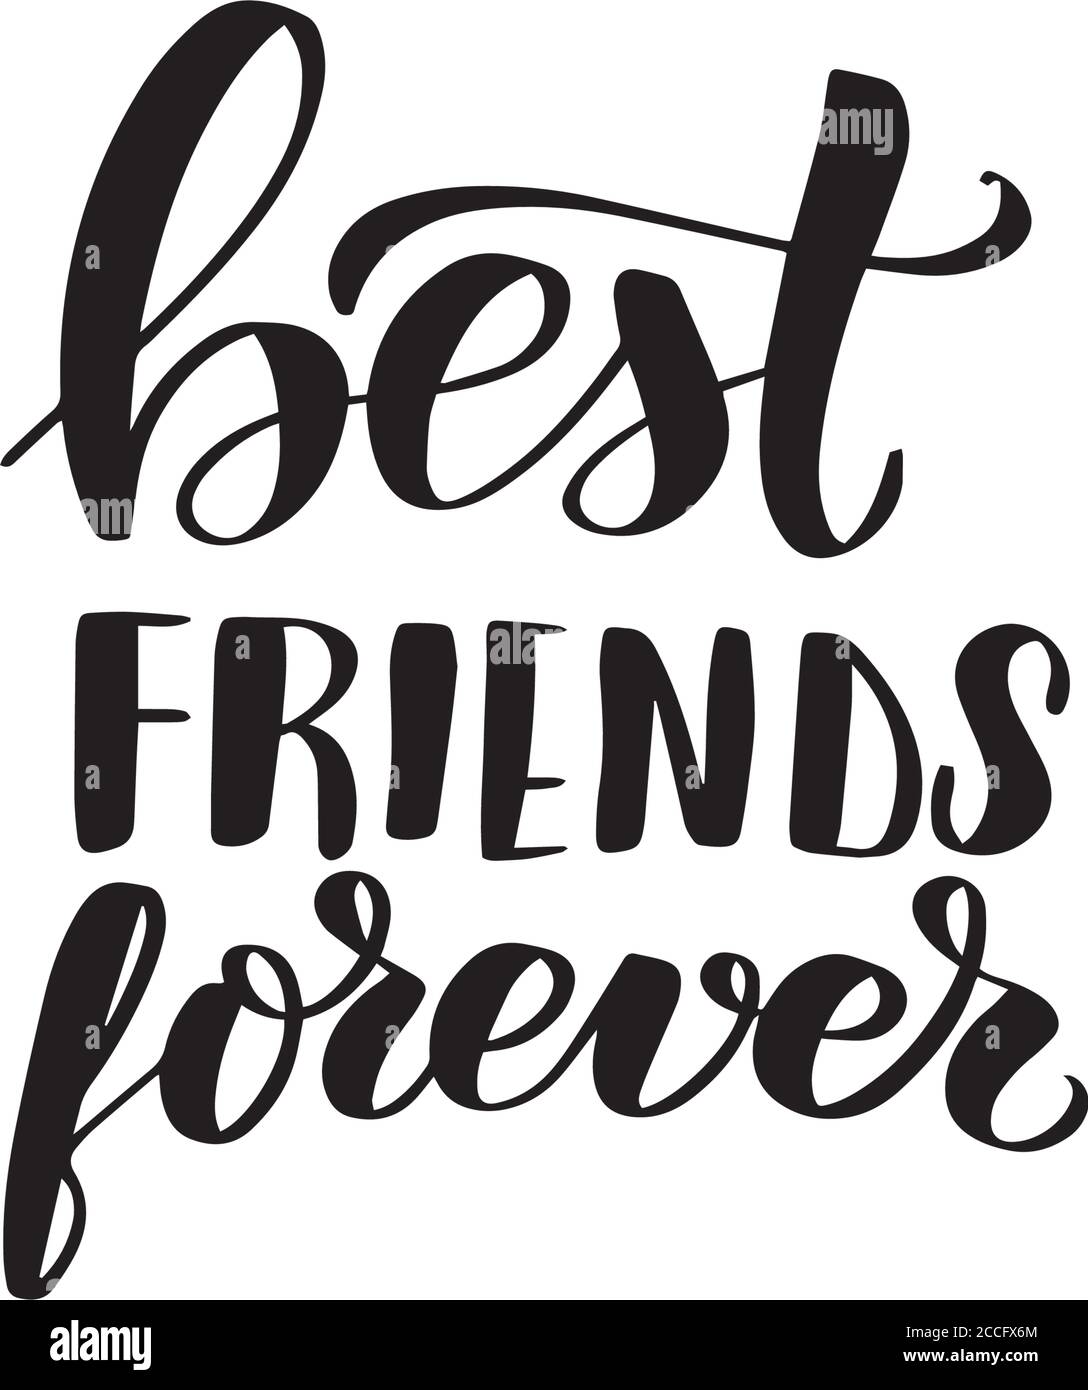 Best friends forever Black and White Stock Photos & Images - Alamy